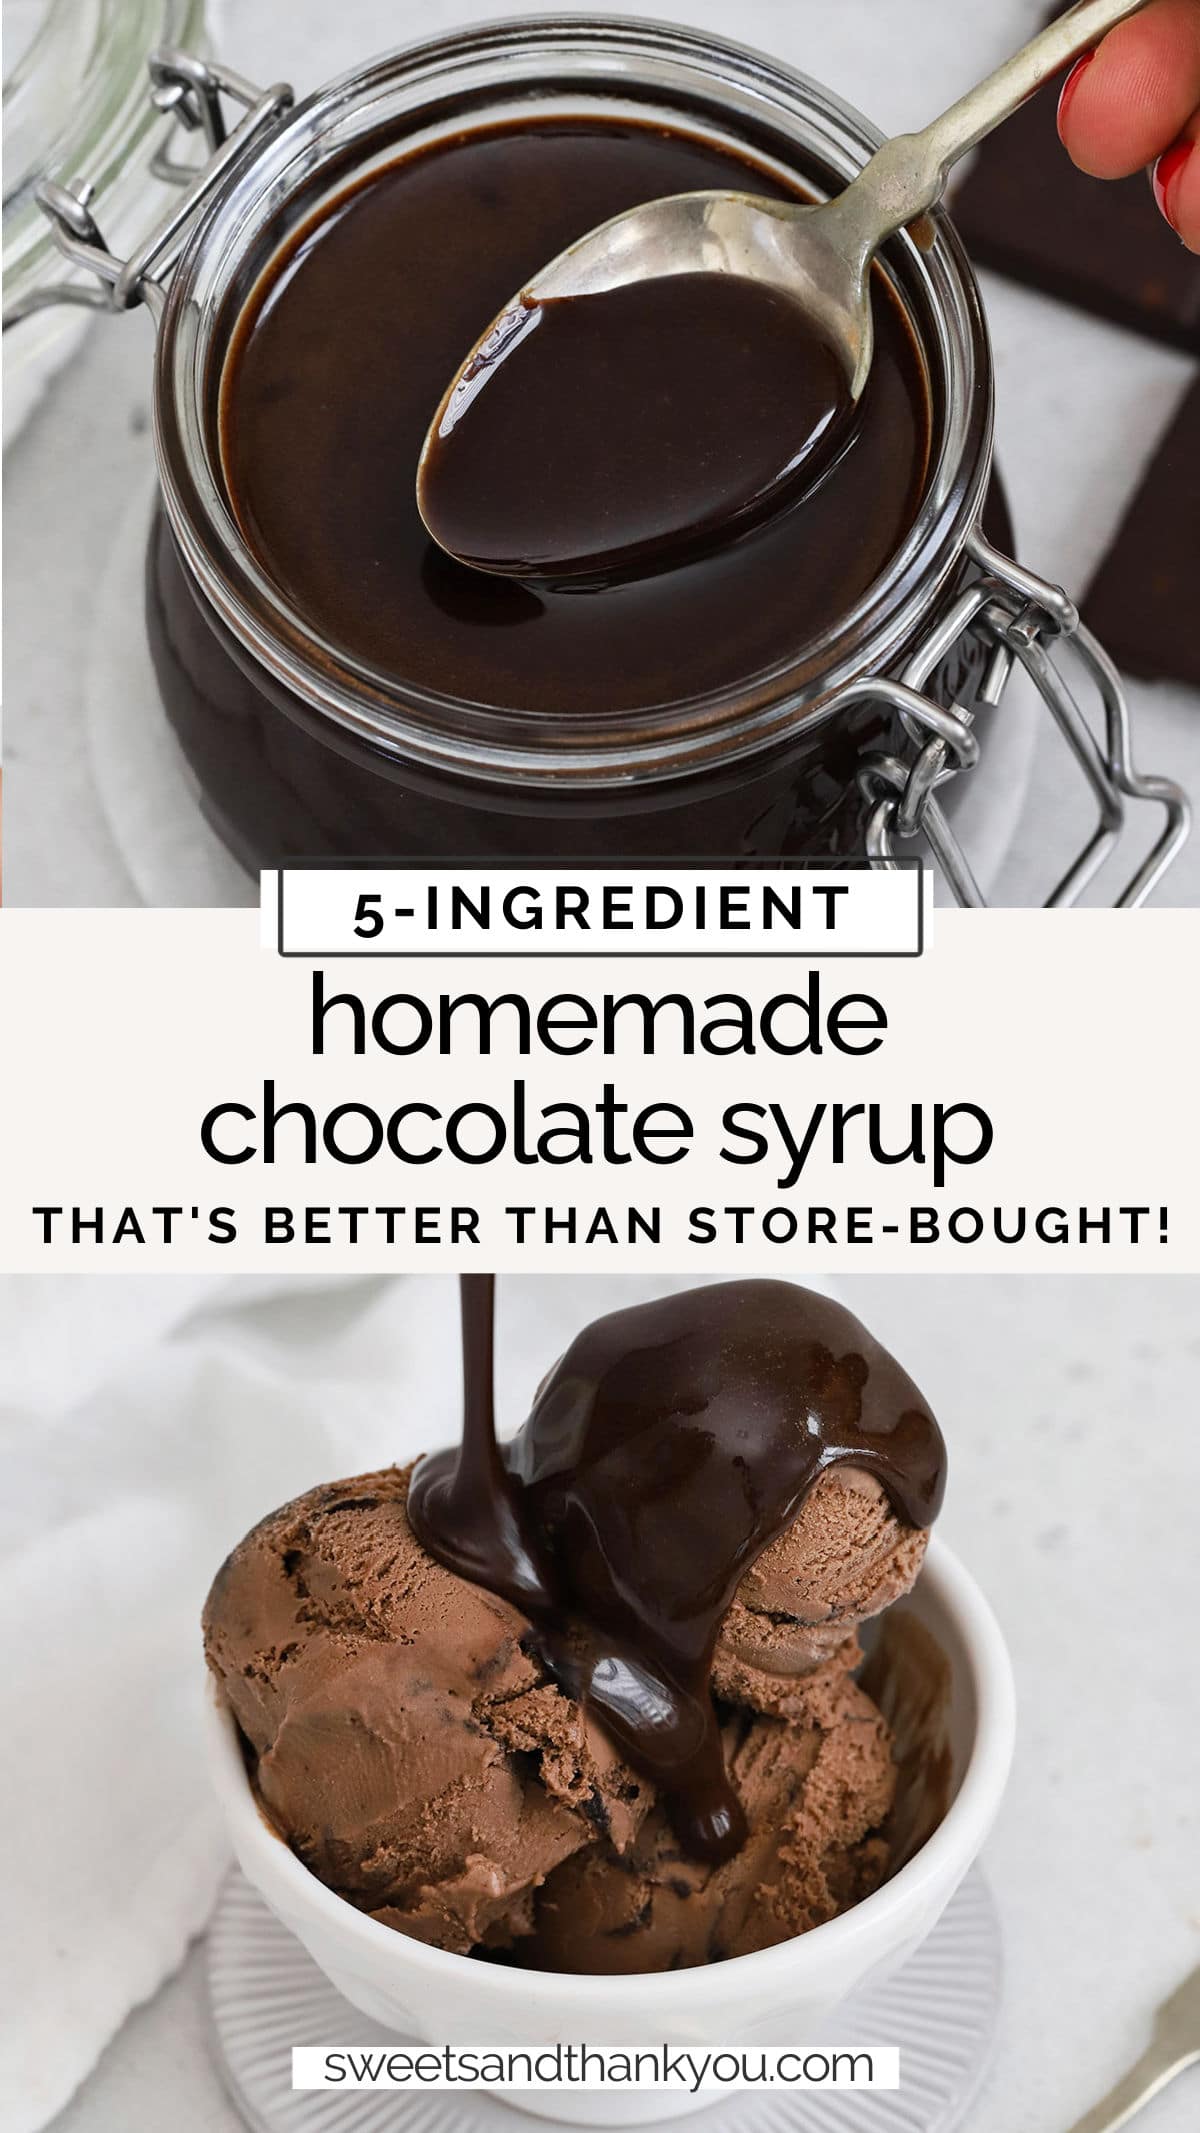 Homemade Chocolate Syrup recipe - This easy chocolate sauce is perfect for ice cream, chocolate milk, and so much more. It's like homemade Hershey's syrup! // Hersheys syrup copycat // homemade chocolate sauce / chocolate sauce fruit dip / 5 ingredient chocolate sauce / chocolate sauce for ice cream / cake plating chocolate sauce / chocolate syrup for ice cream / chocolate syrup fruit dip / hershey's syrup copycat / homemade hershey's chocolate syrup / chocolate syrup for chocolate milk 